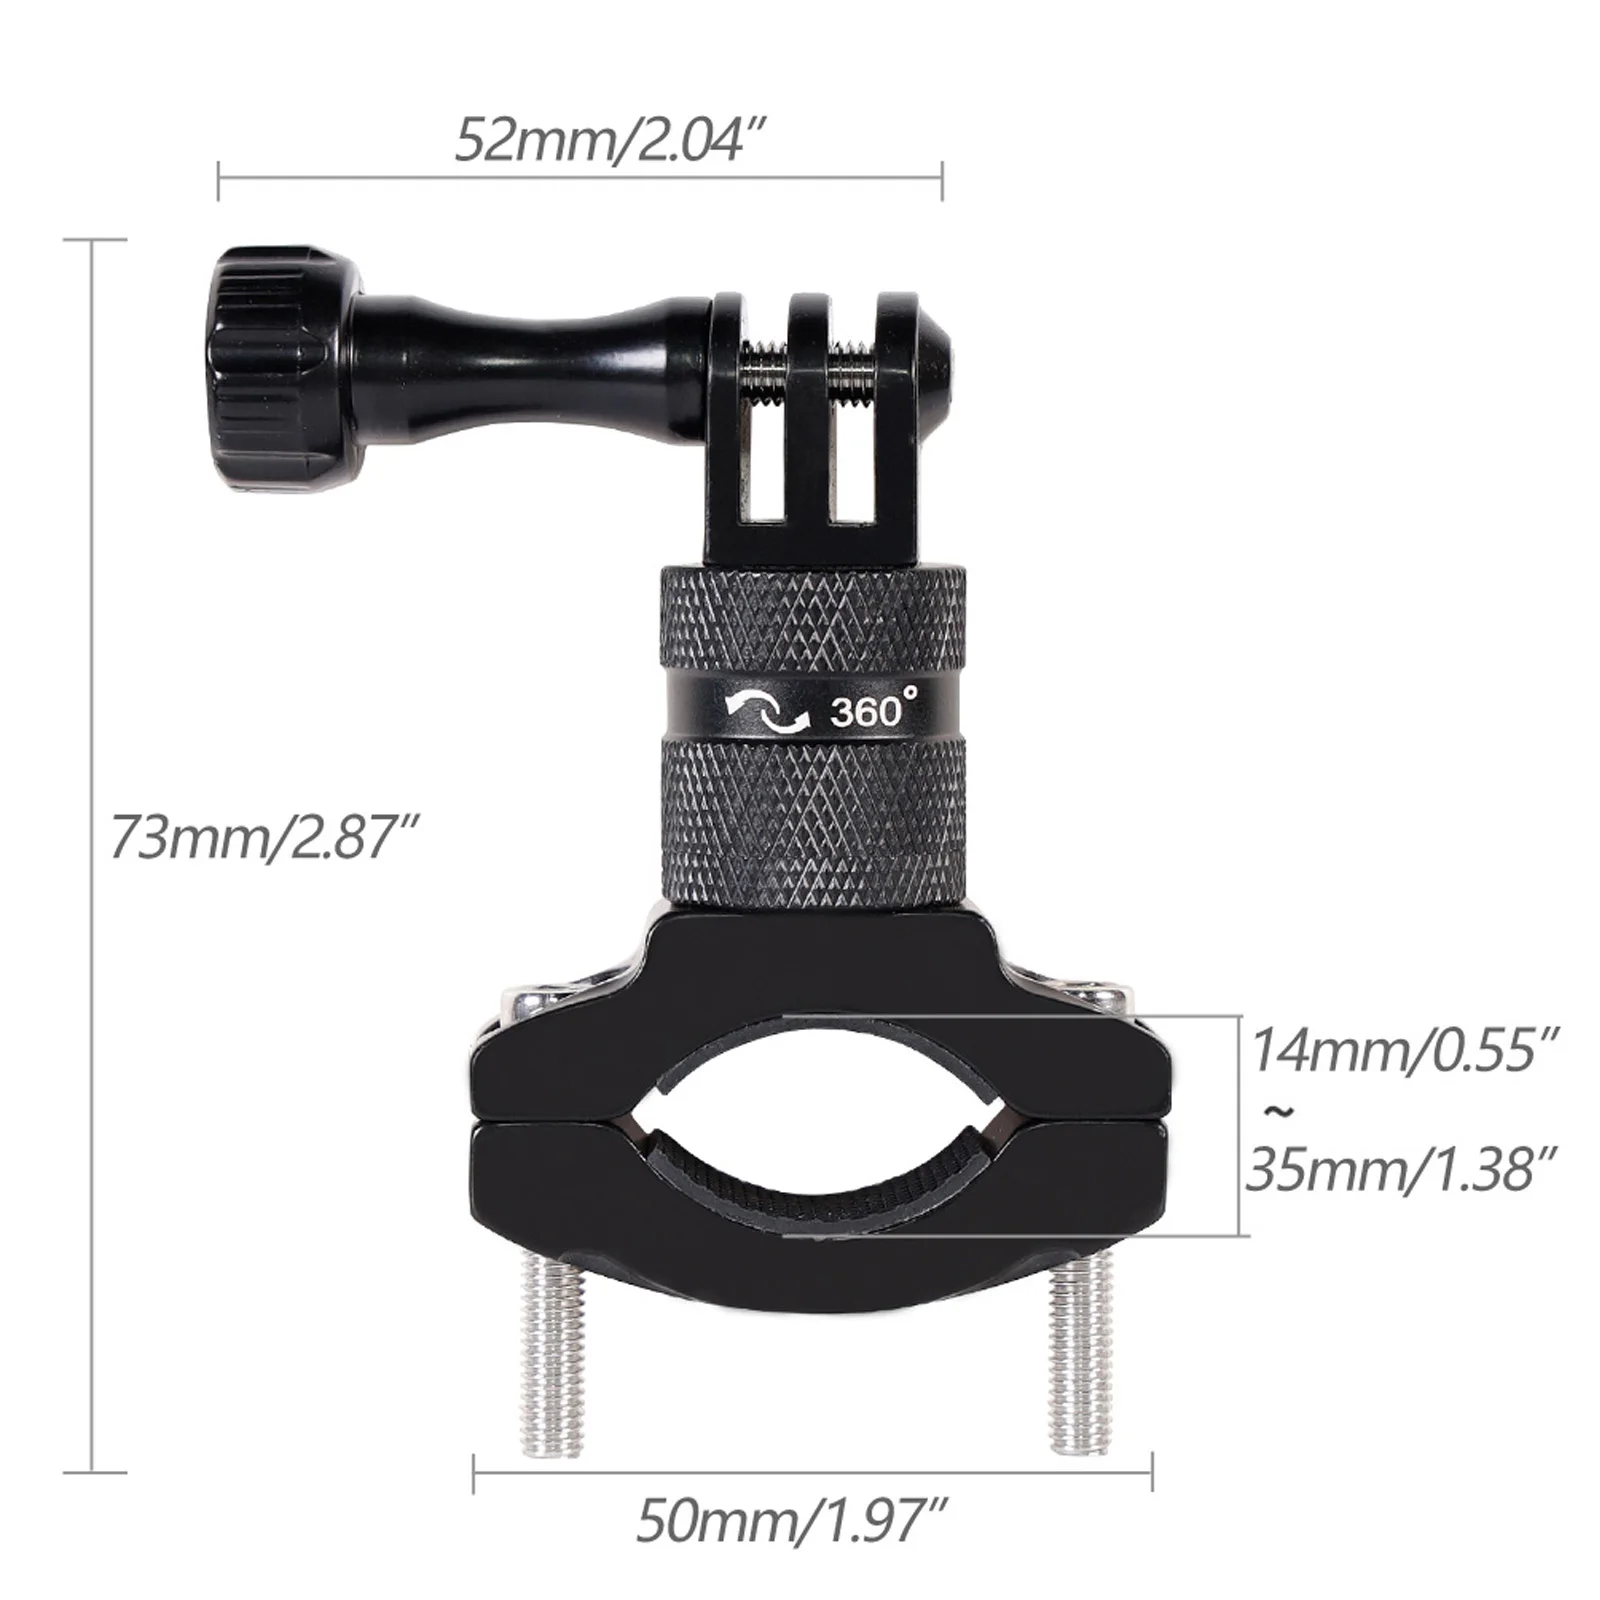 

Aluminum Alloy Bike Bicycle Handlebar Mount for Gopro Hero 10/9/8/7/6/5/4 Session AKASO Campark and Other Action Cameras